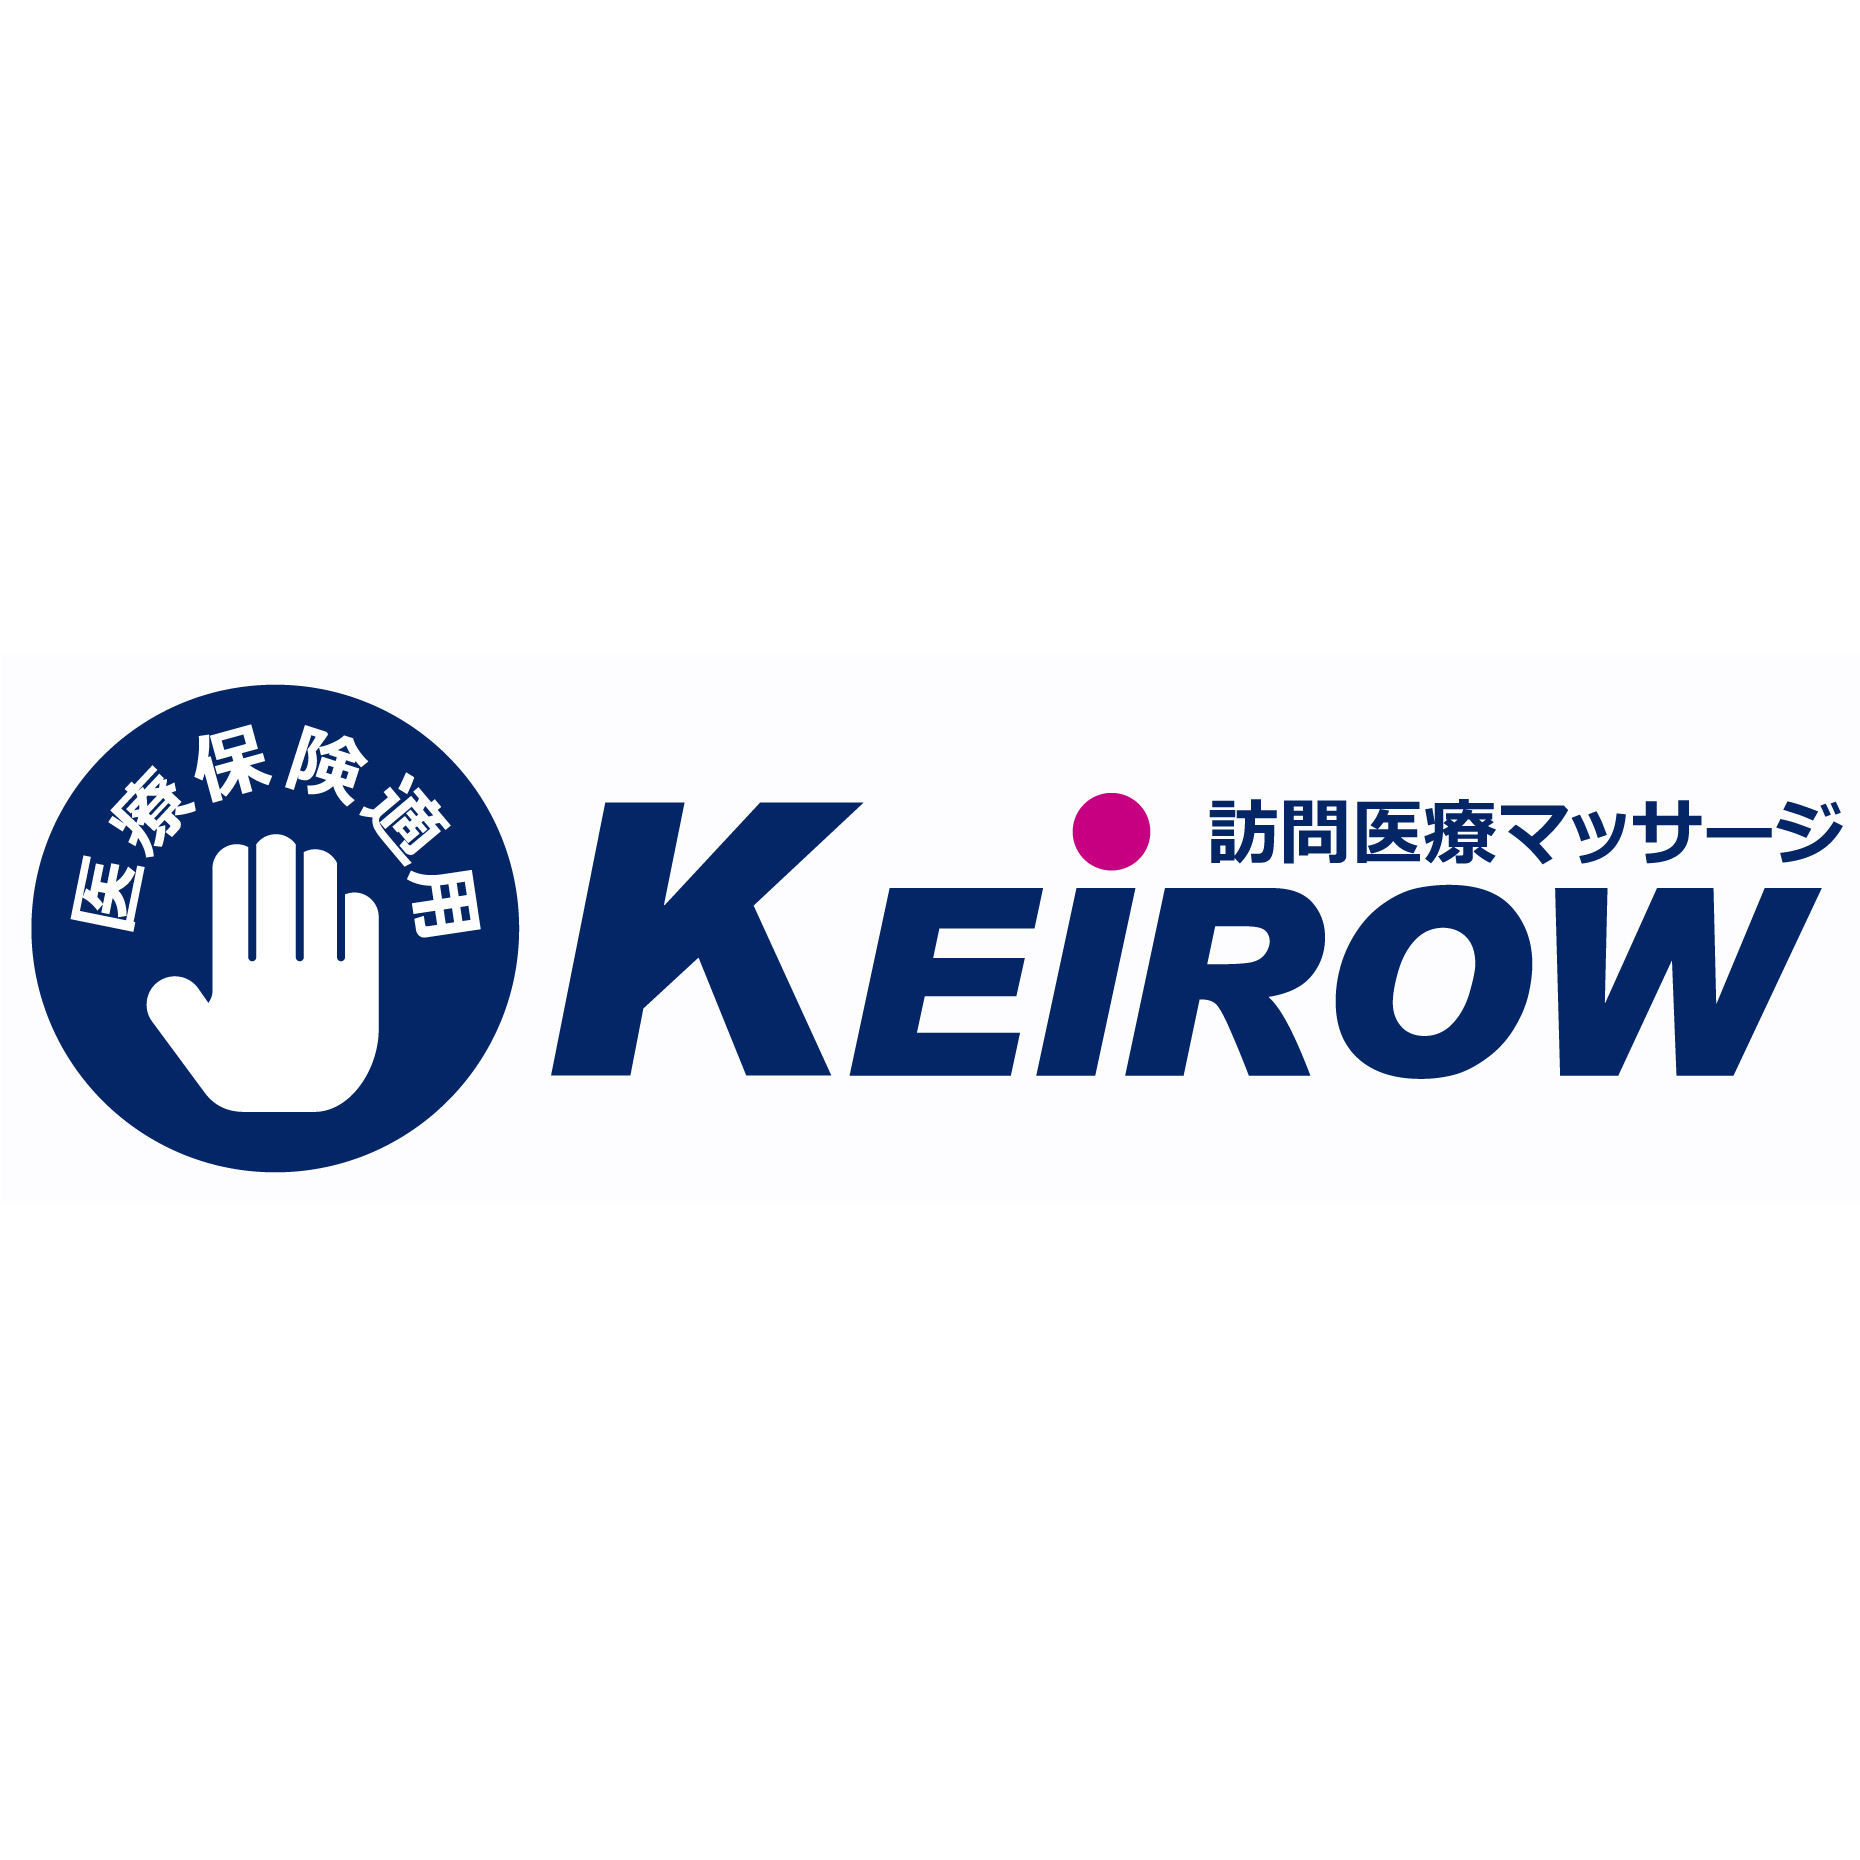 KEiROW多摩区西ステーション